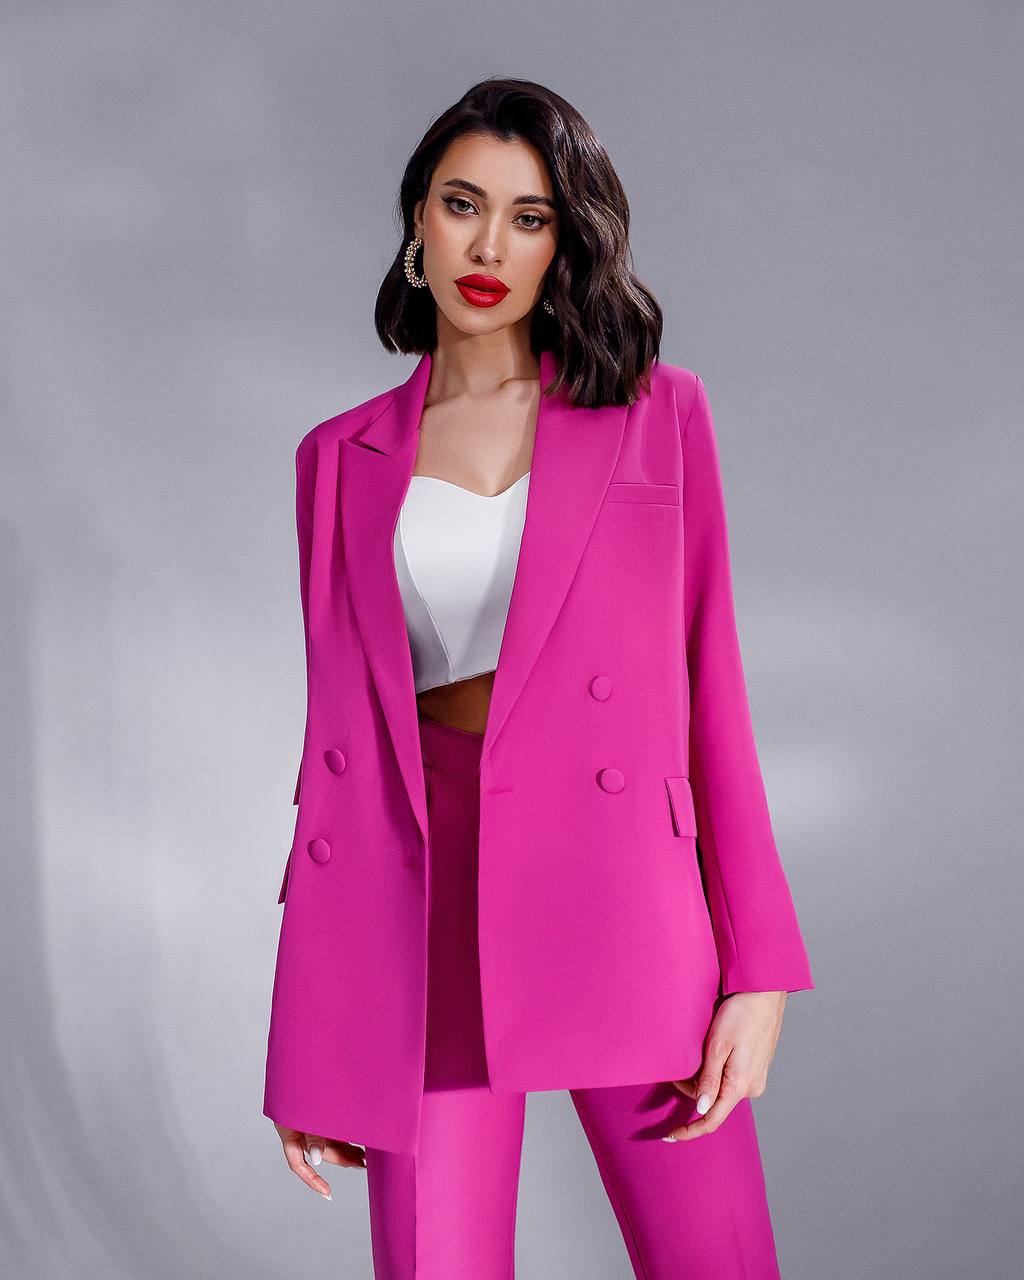 a woman in a bright pink suit posing for a picture